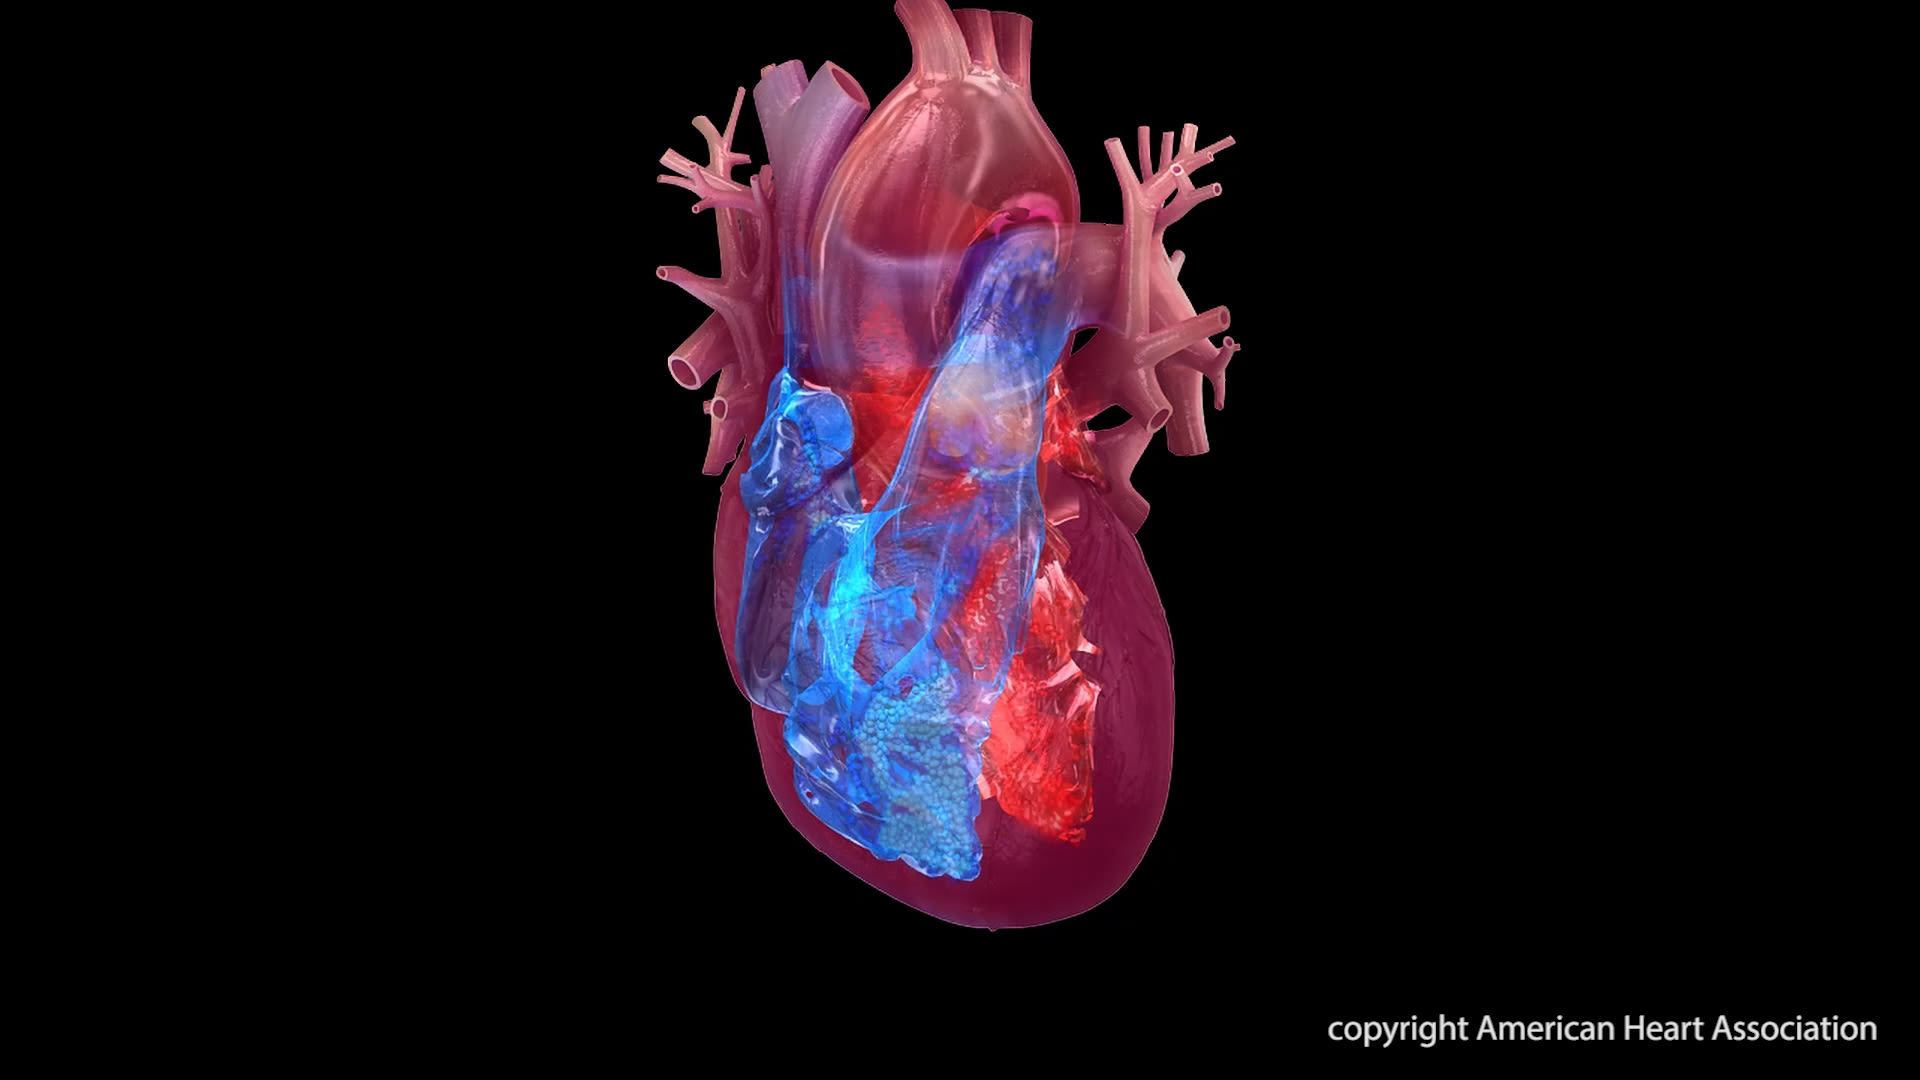 Heart healthy behaviors may help reverse rapid cell aging